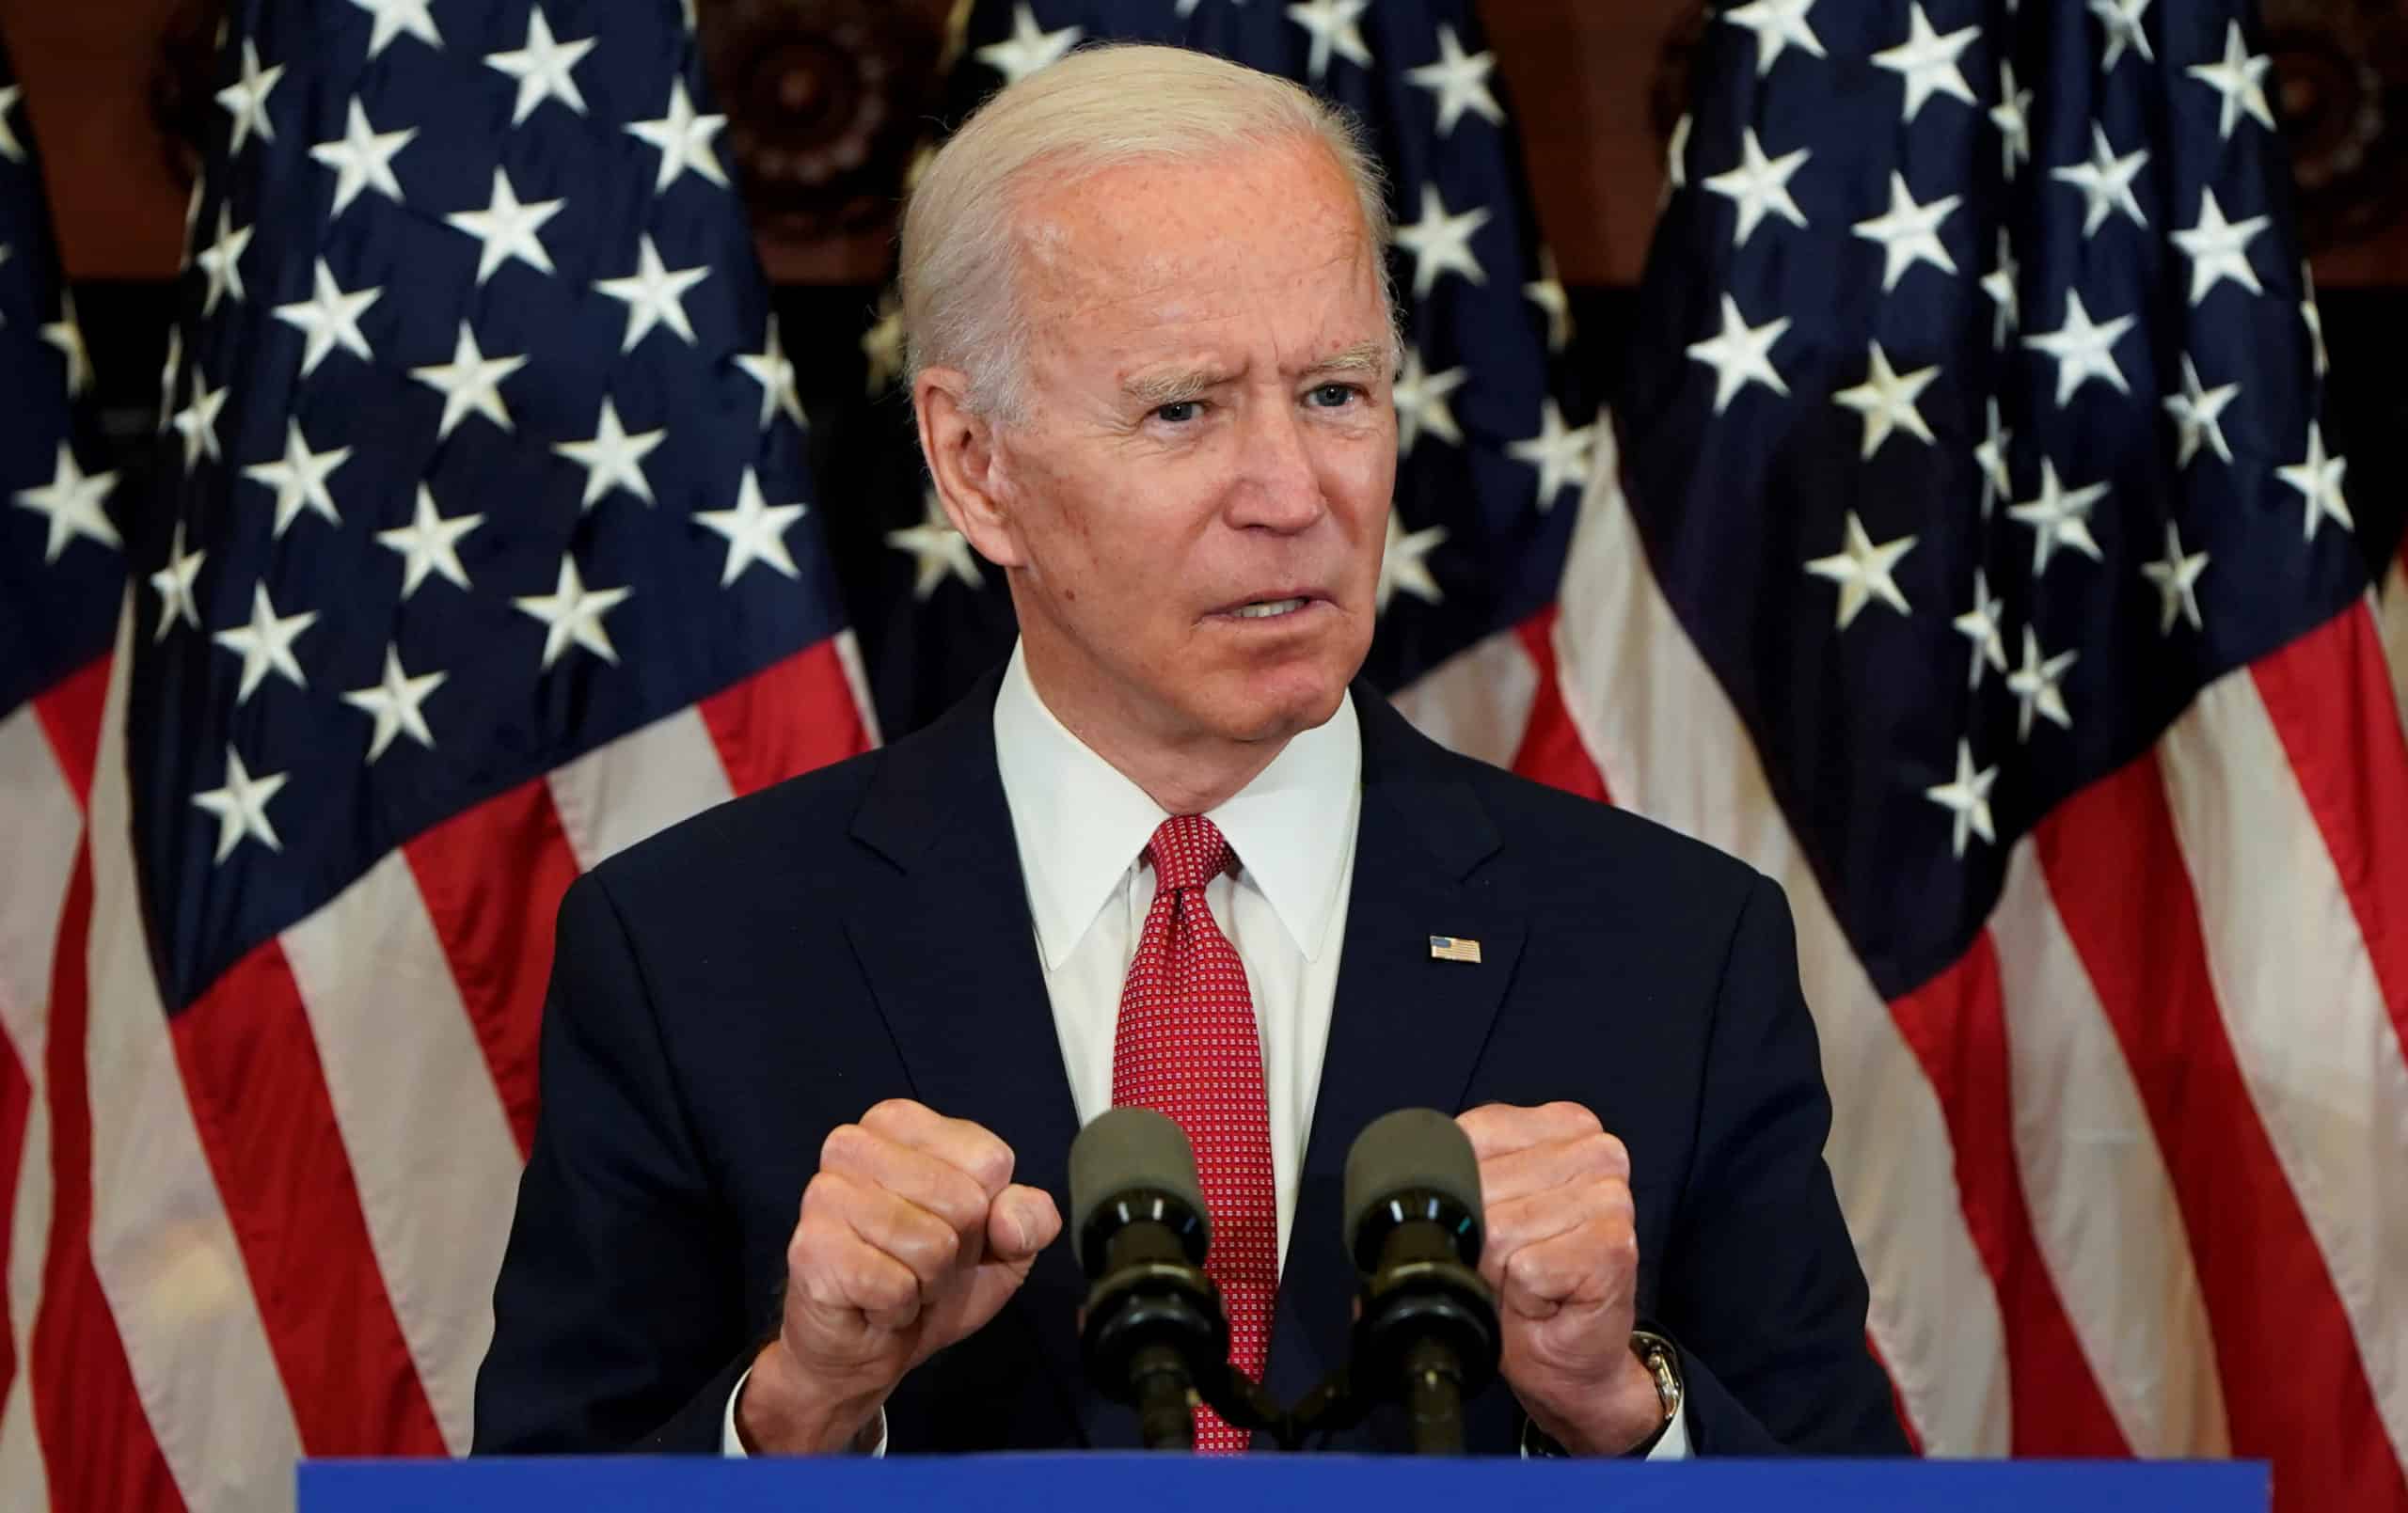 73 Republican Former National Security Officials Call Trump Dangerously Unfit And Endorse Biden